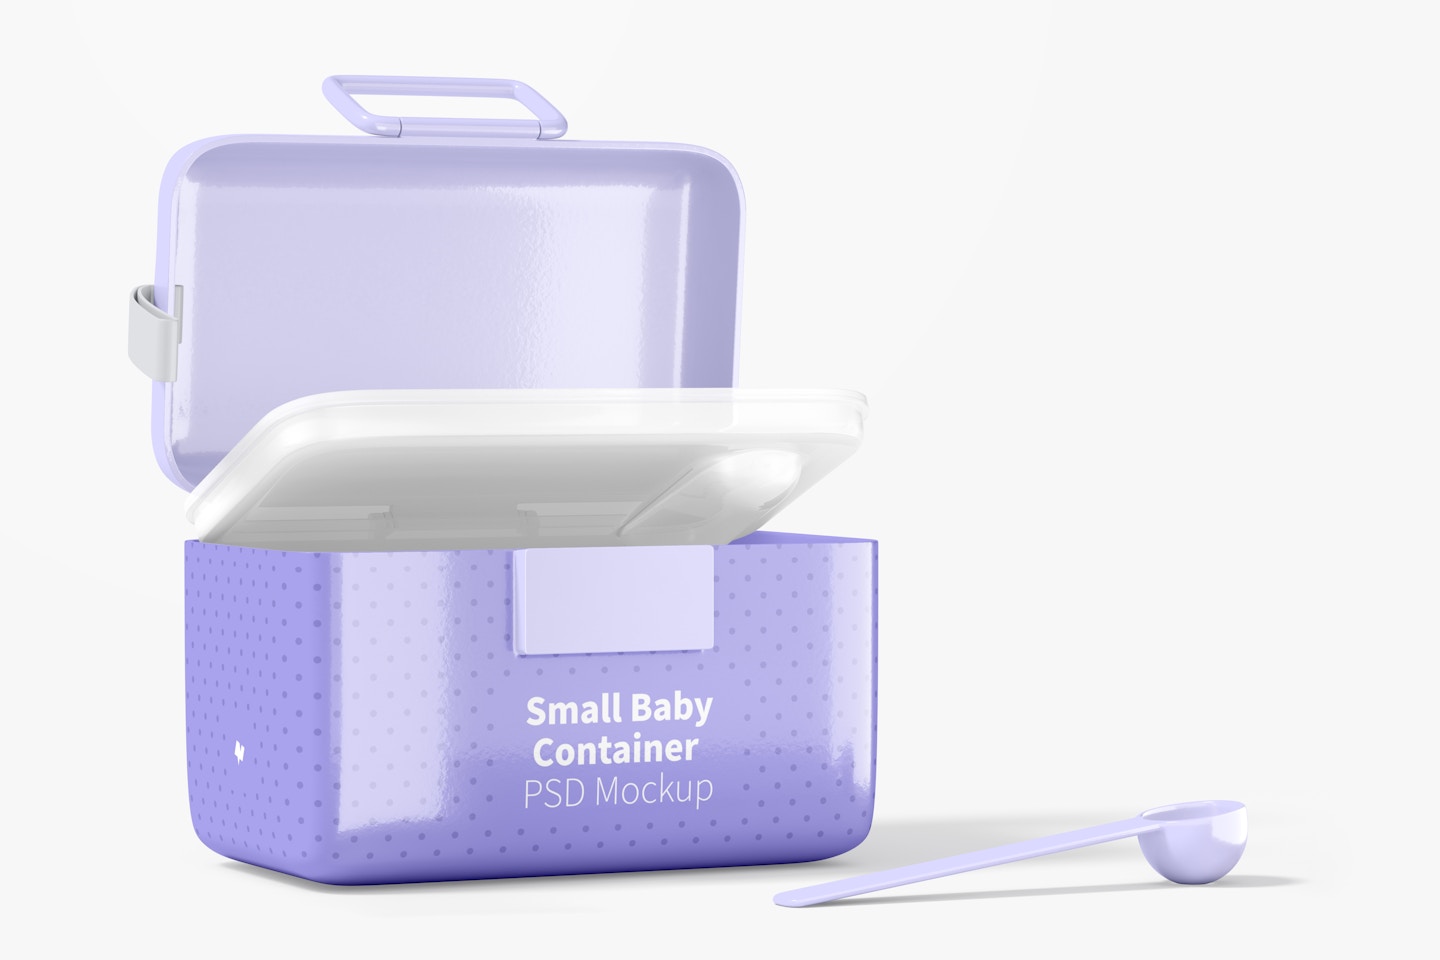 Small Baby Milk Powder Container Mockup, Opened